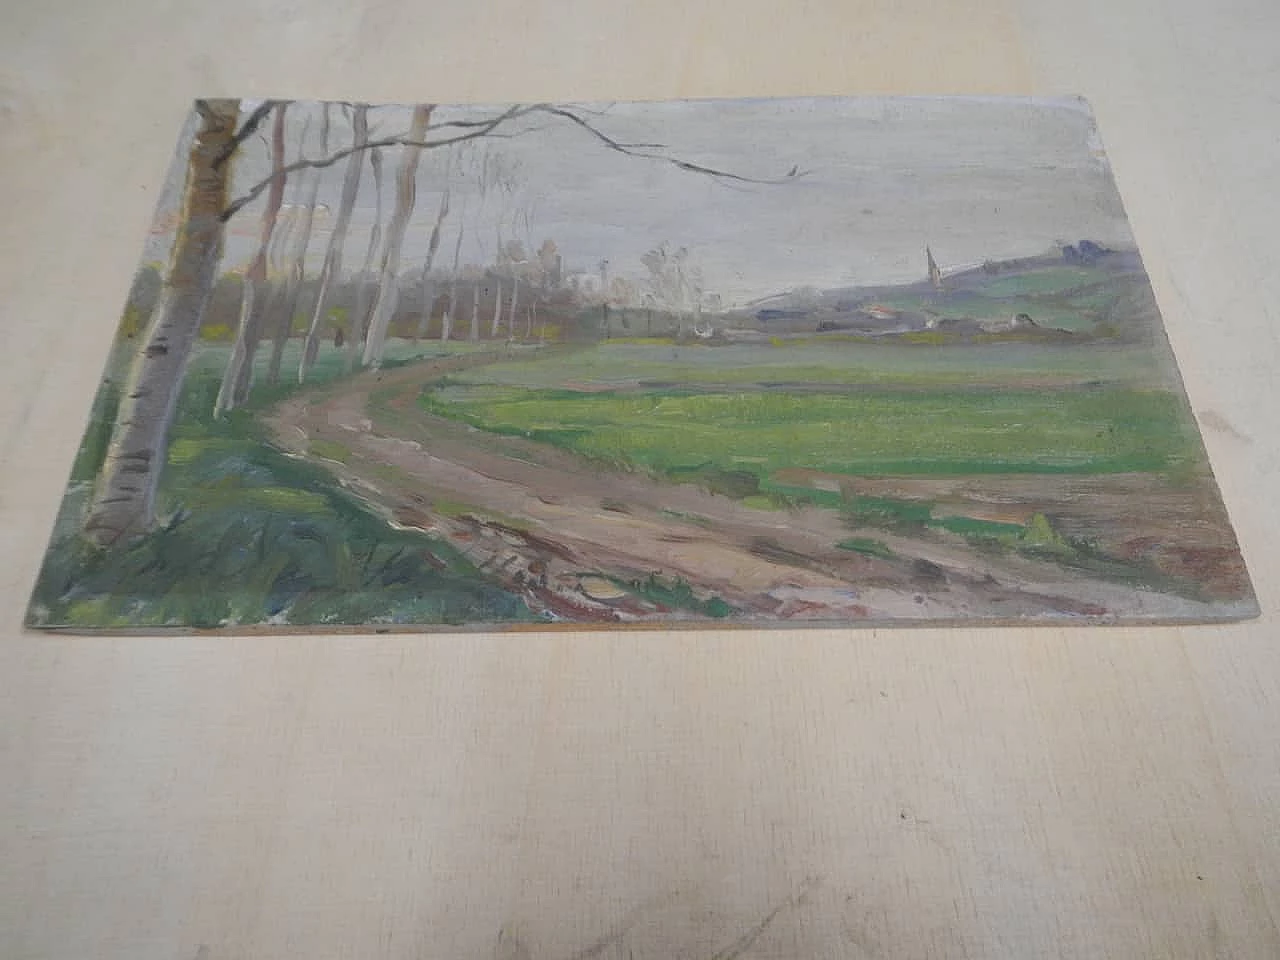 Des Champs, road, painting on wood, early 20th century 10